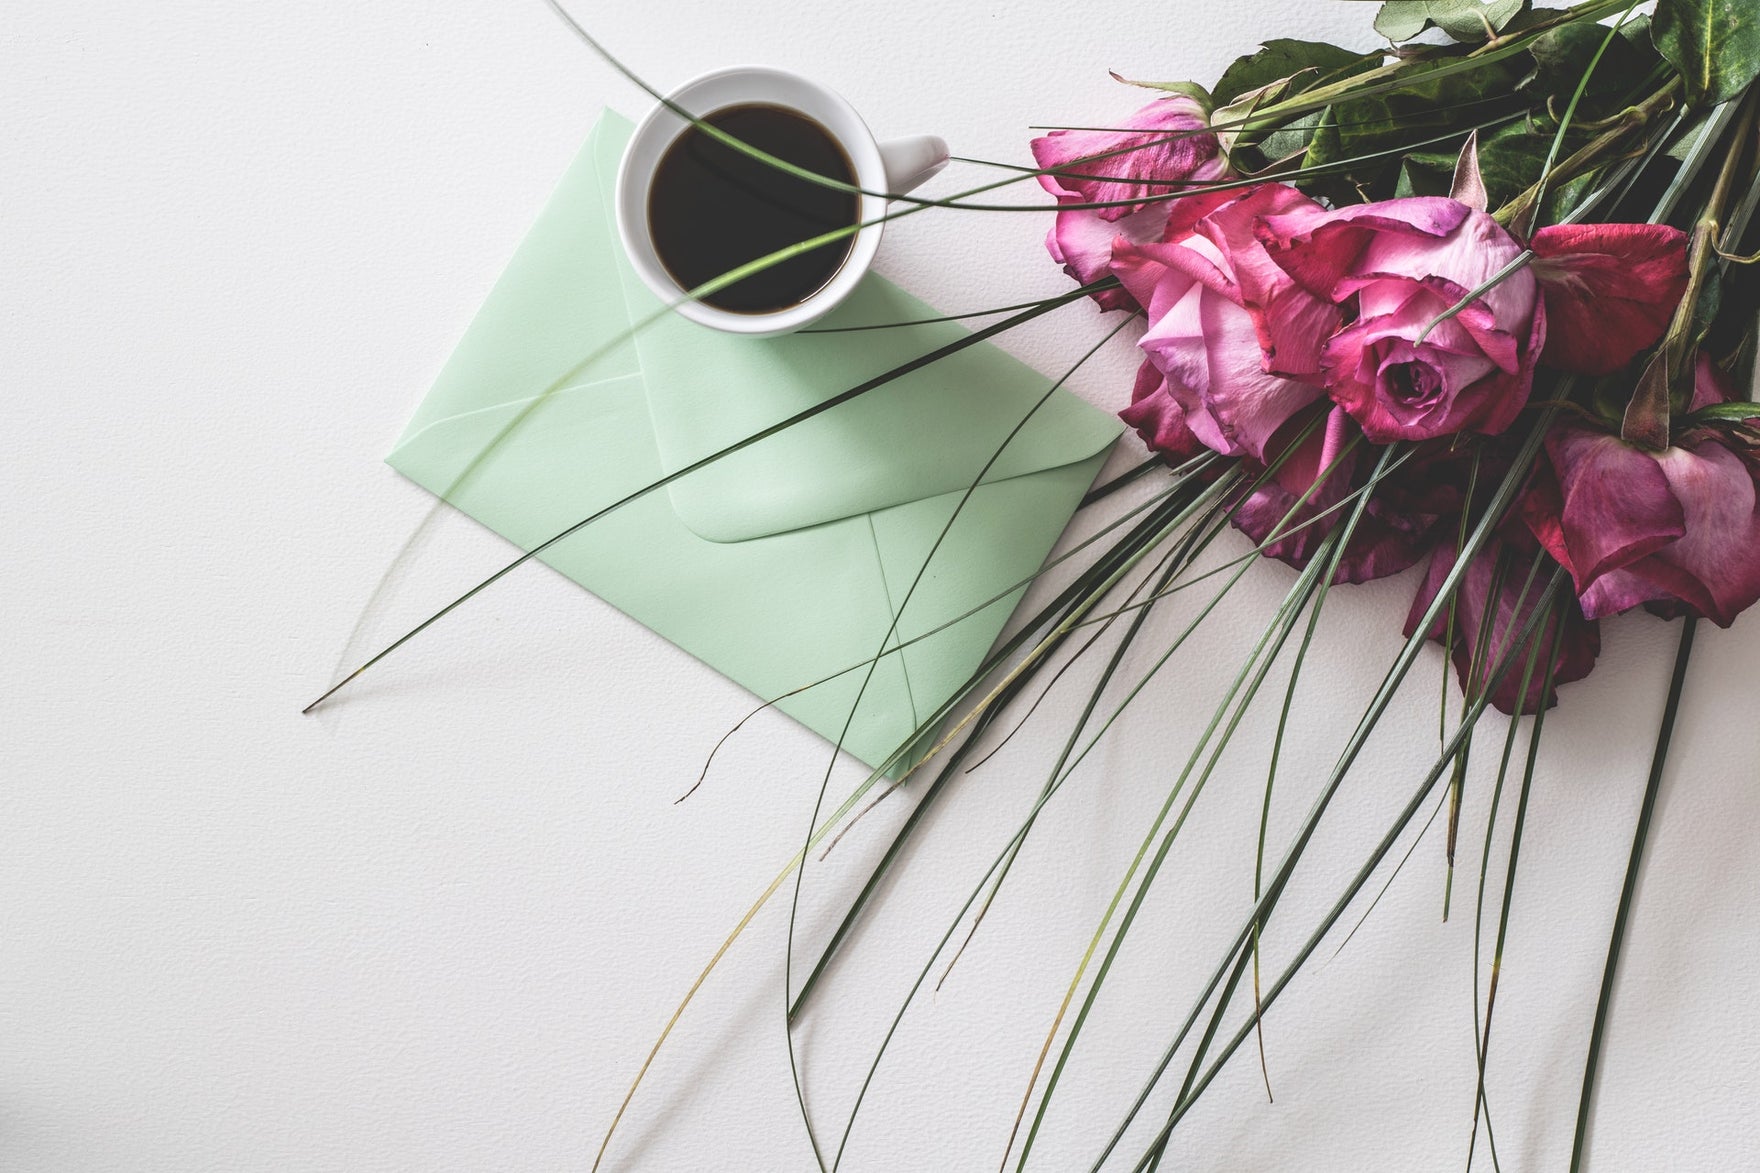 A bouquet of pink roses sits on a table next to a cup of coffee and a sage green envelope.